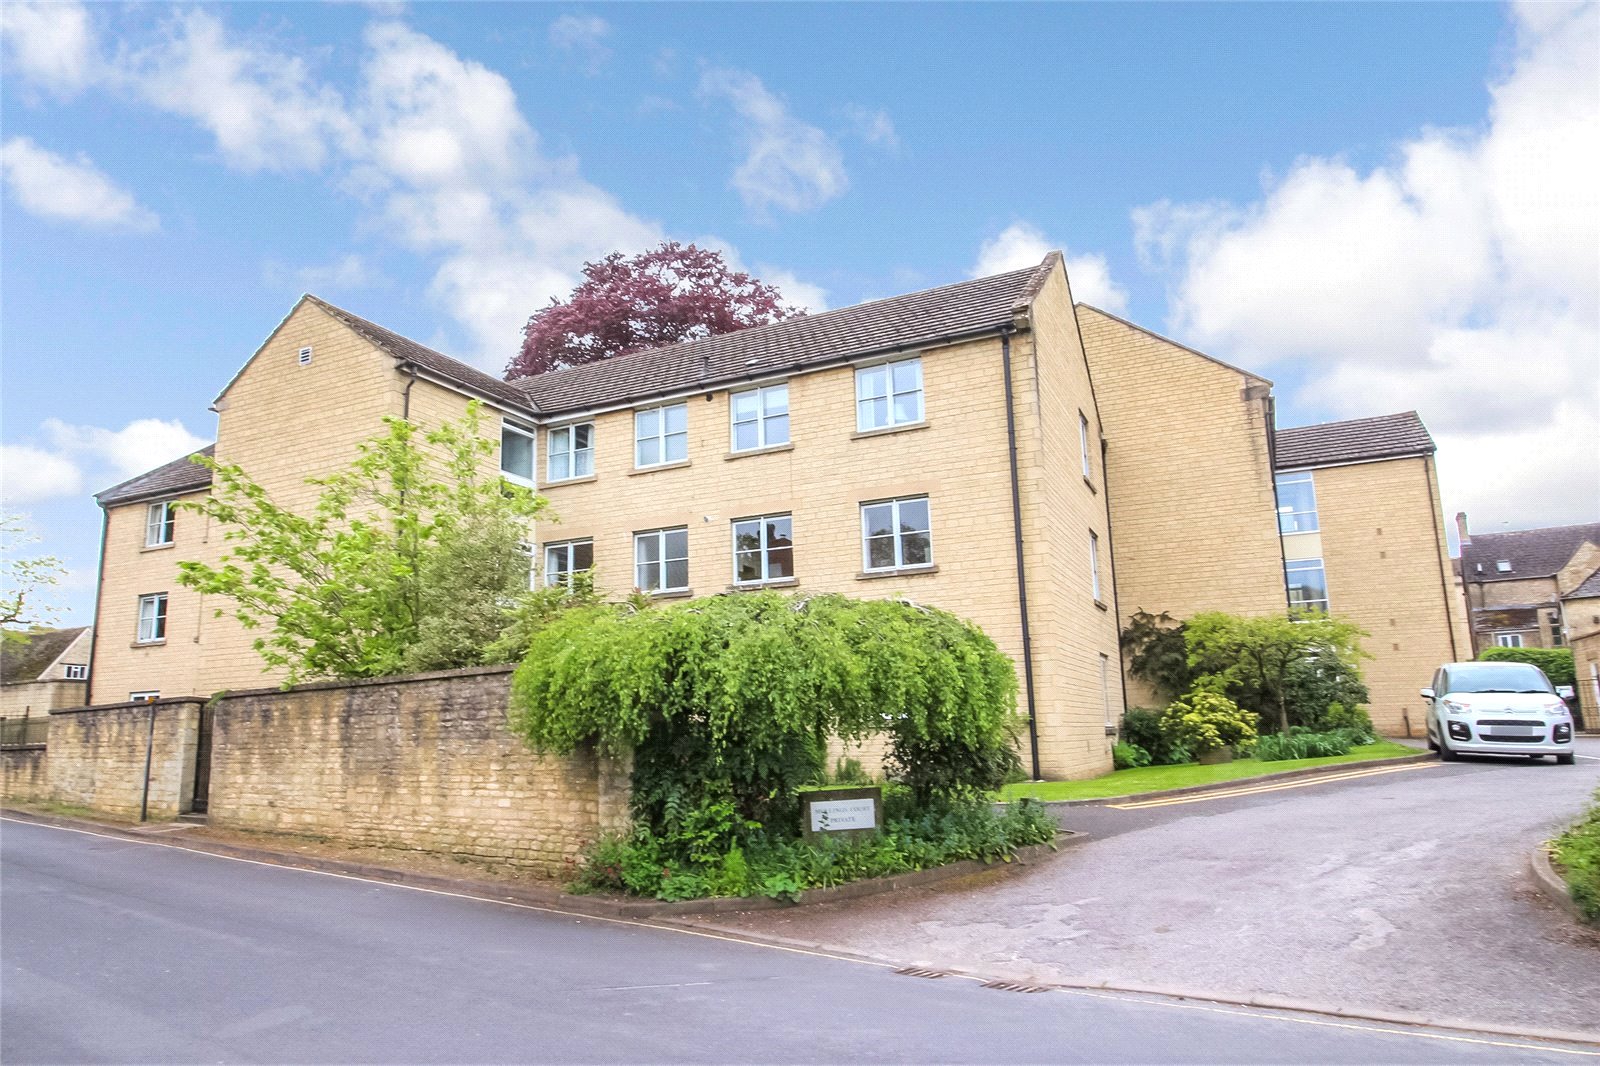 Mullings Court, Cirencester, GL7